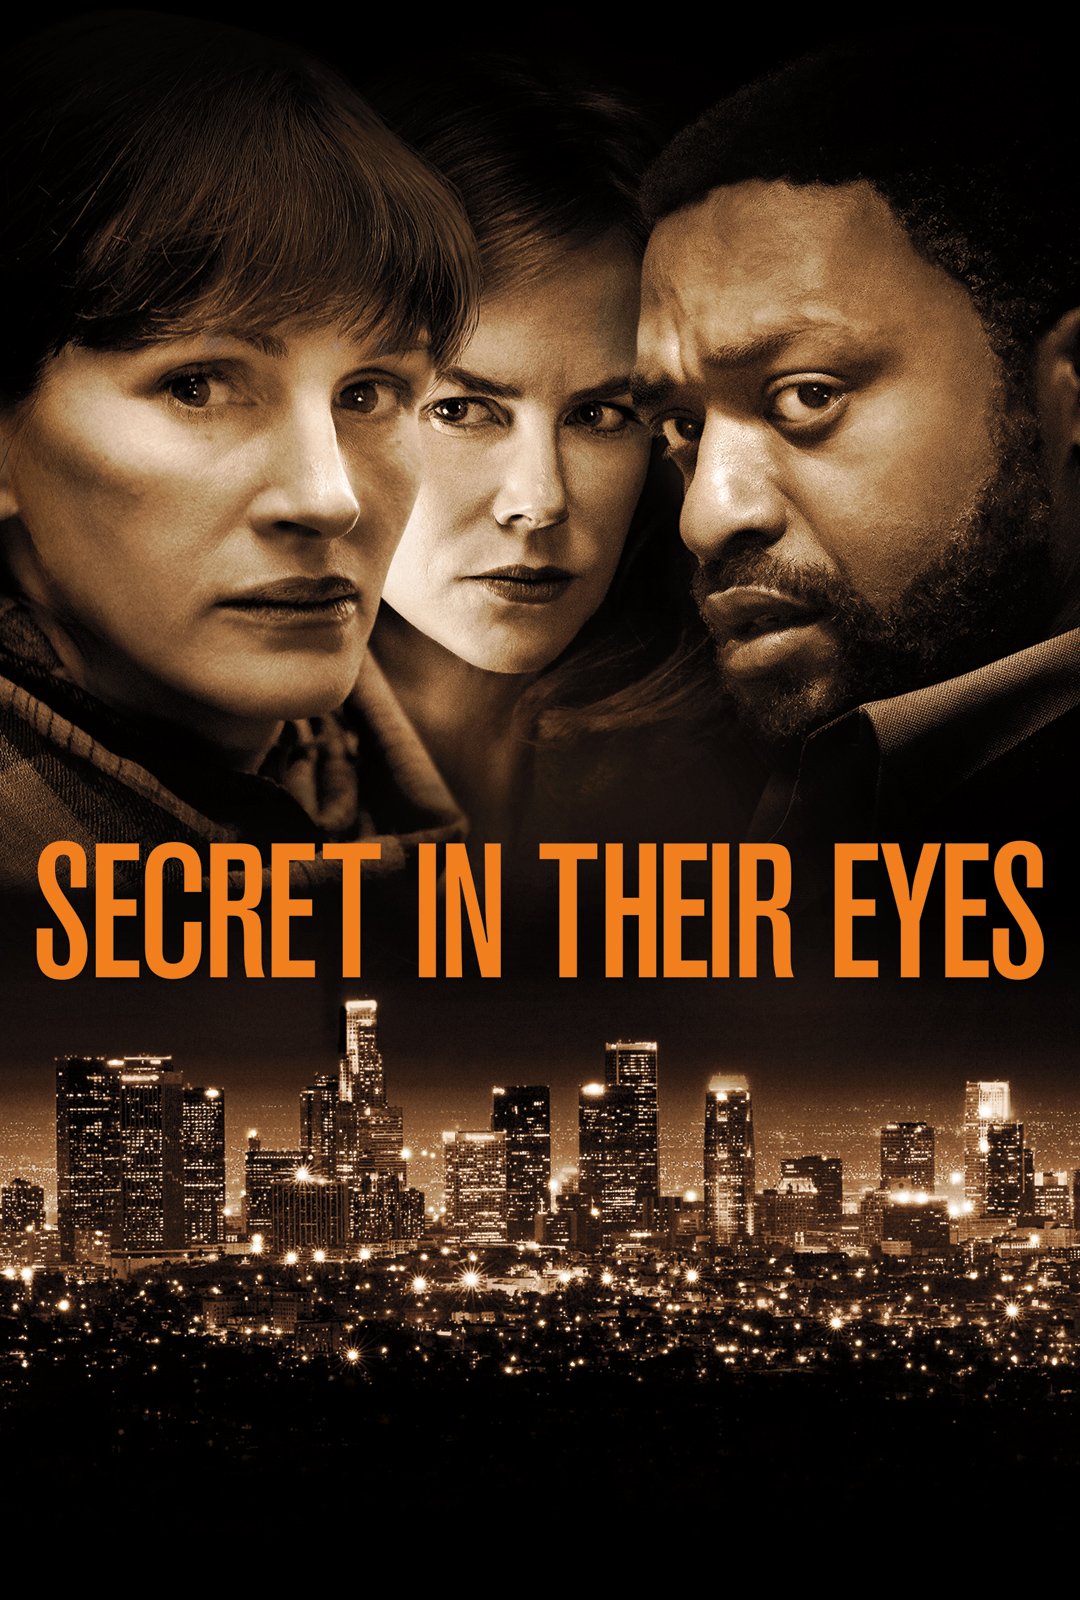 The secret in their eyes full movie with english subtitles Secret In Their Eyes 2015 Imdb